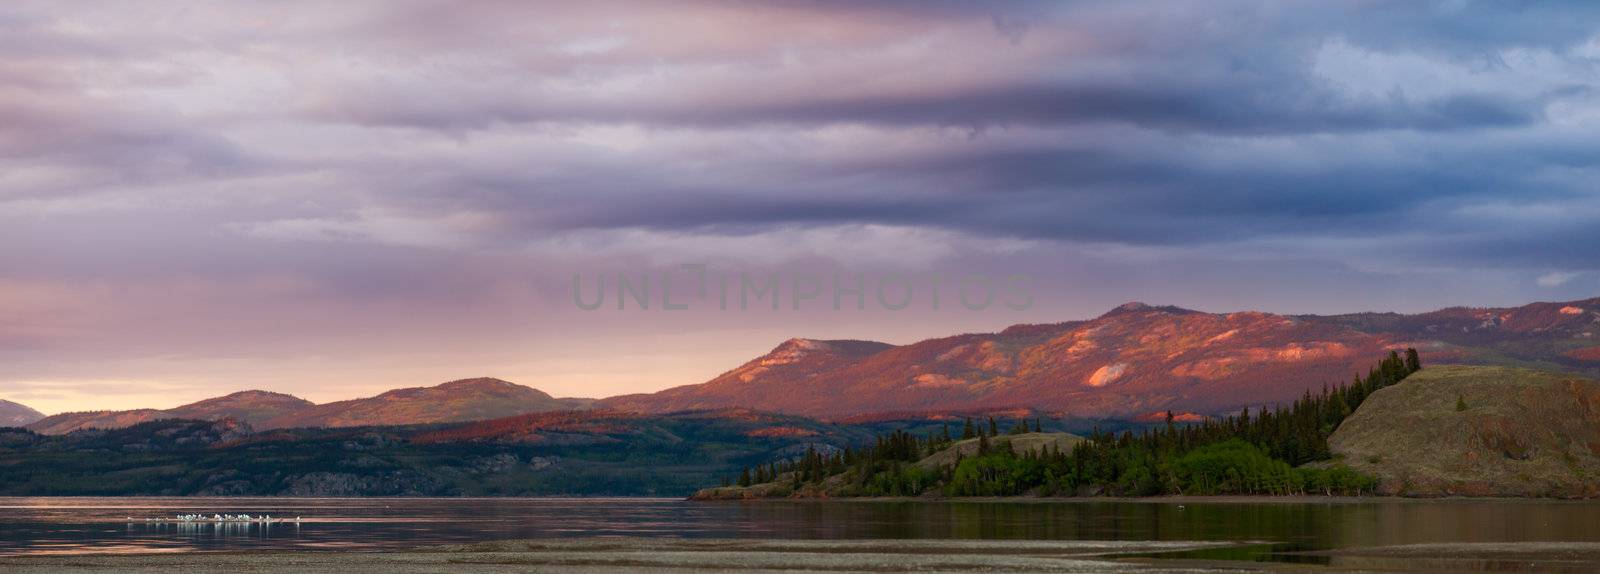 Distant mountains glowing in sunset light at Lake Laberge, Yukon Territory, Canada.